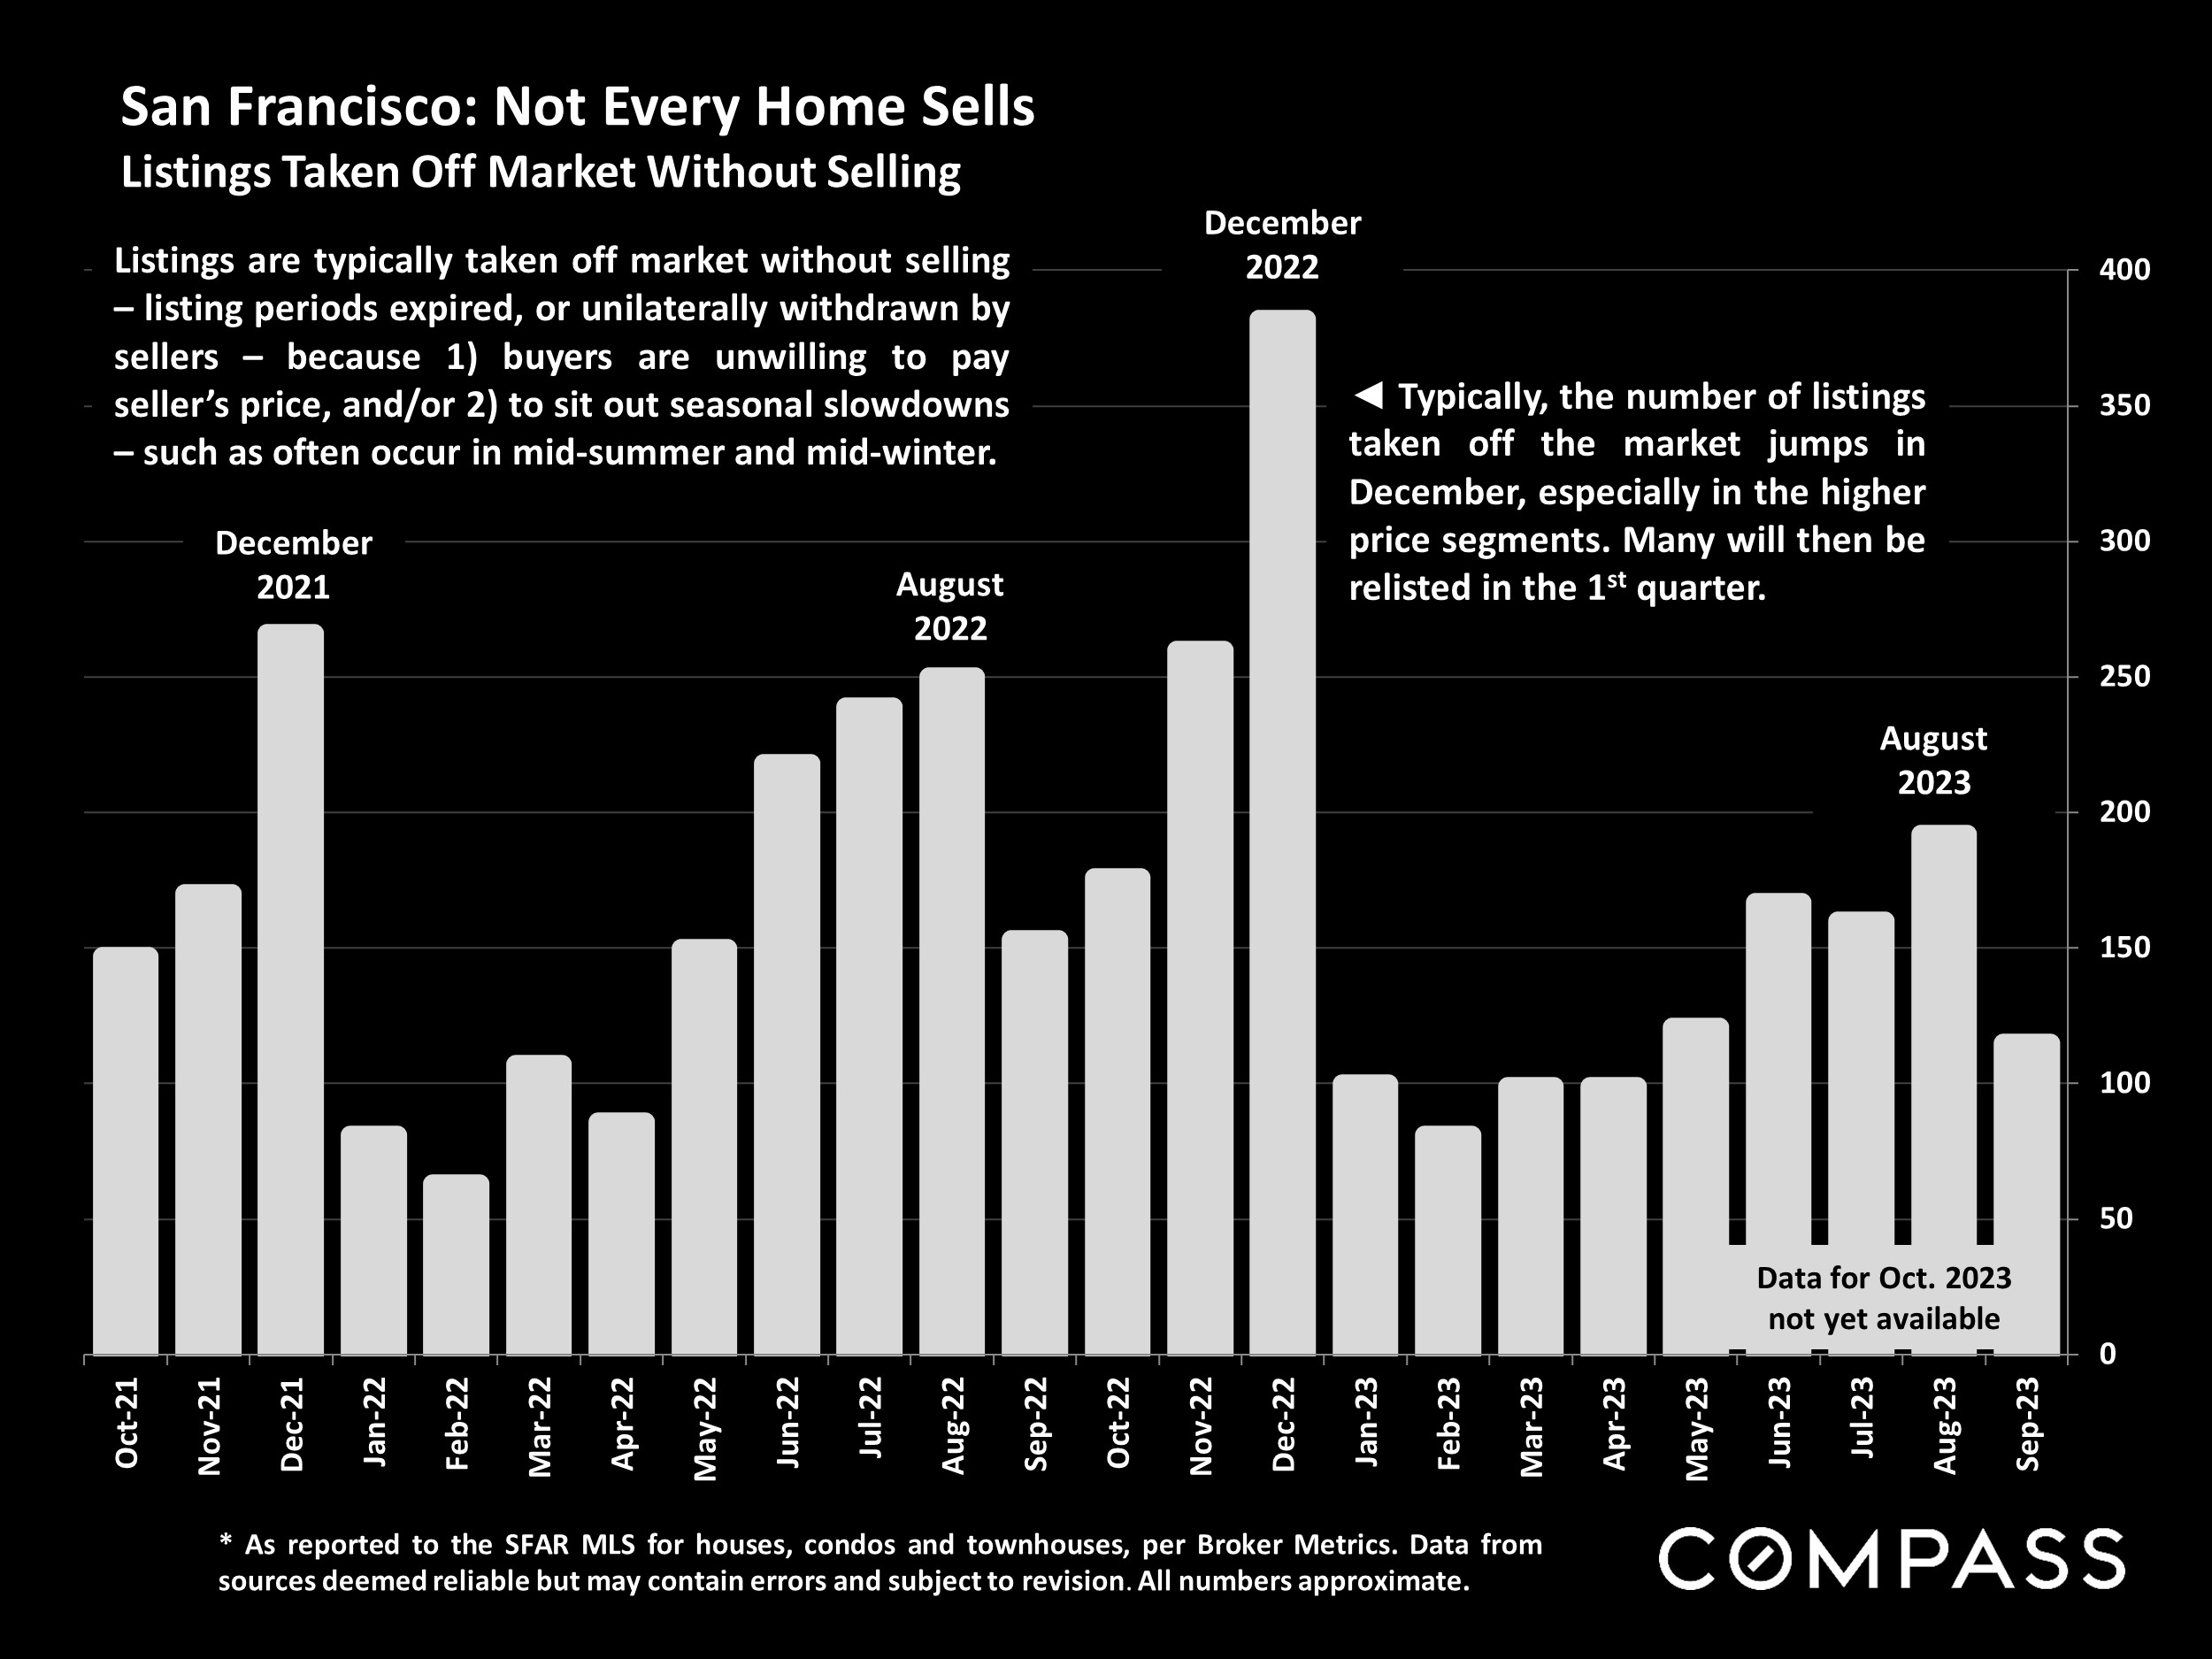 San Francisco: Not Every Home Sells Listings Taken Off Market Without Selling